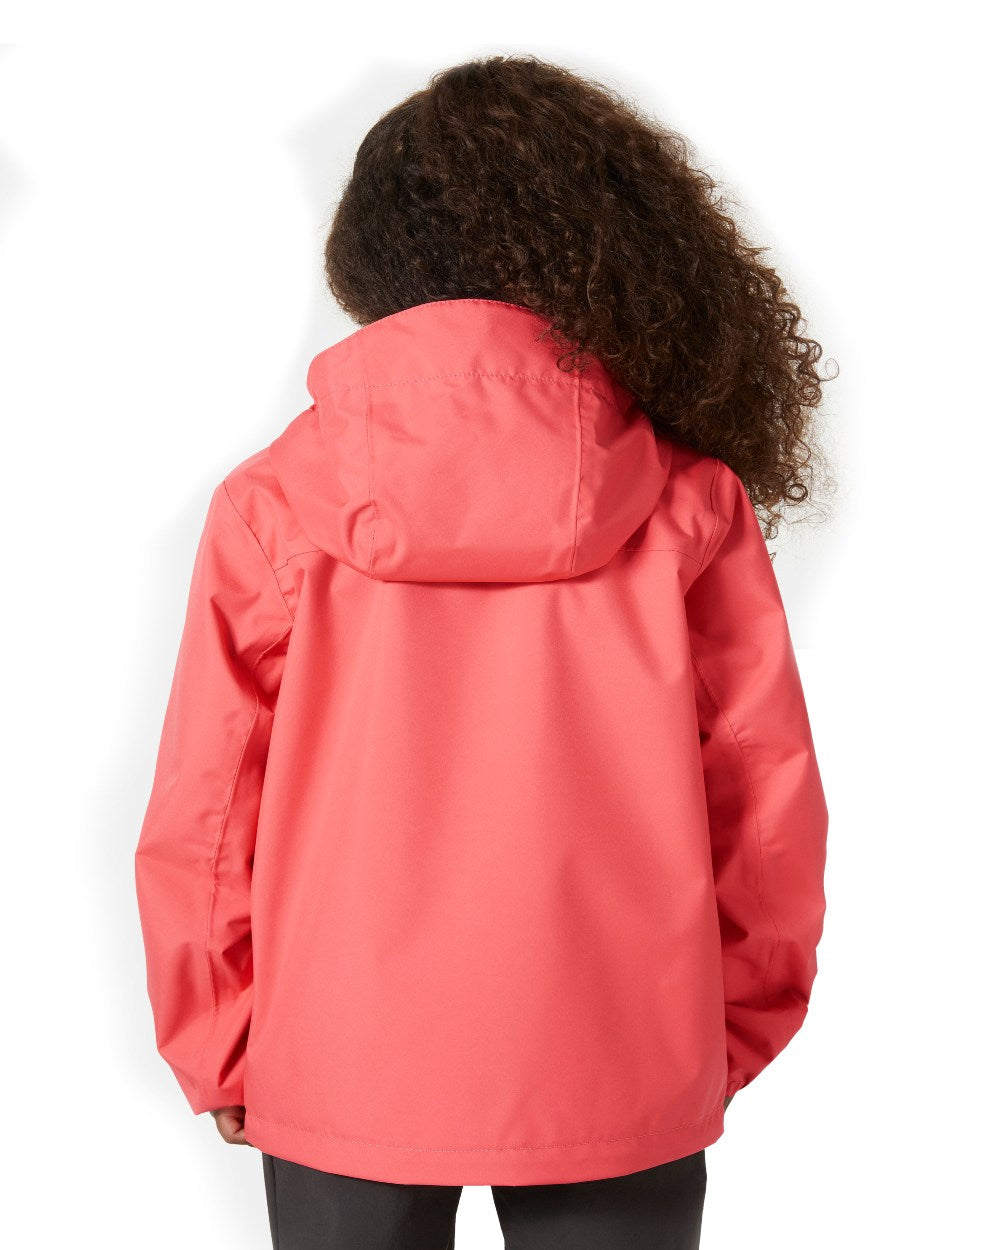 Sunset Pink Coloured Helly Hansen Childrens Crew Hooded Jacket On A White Background 